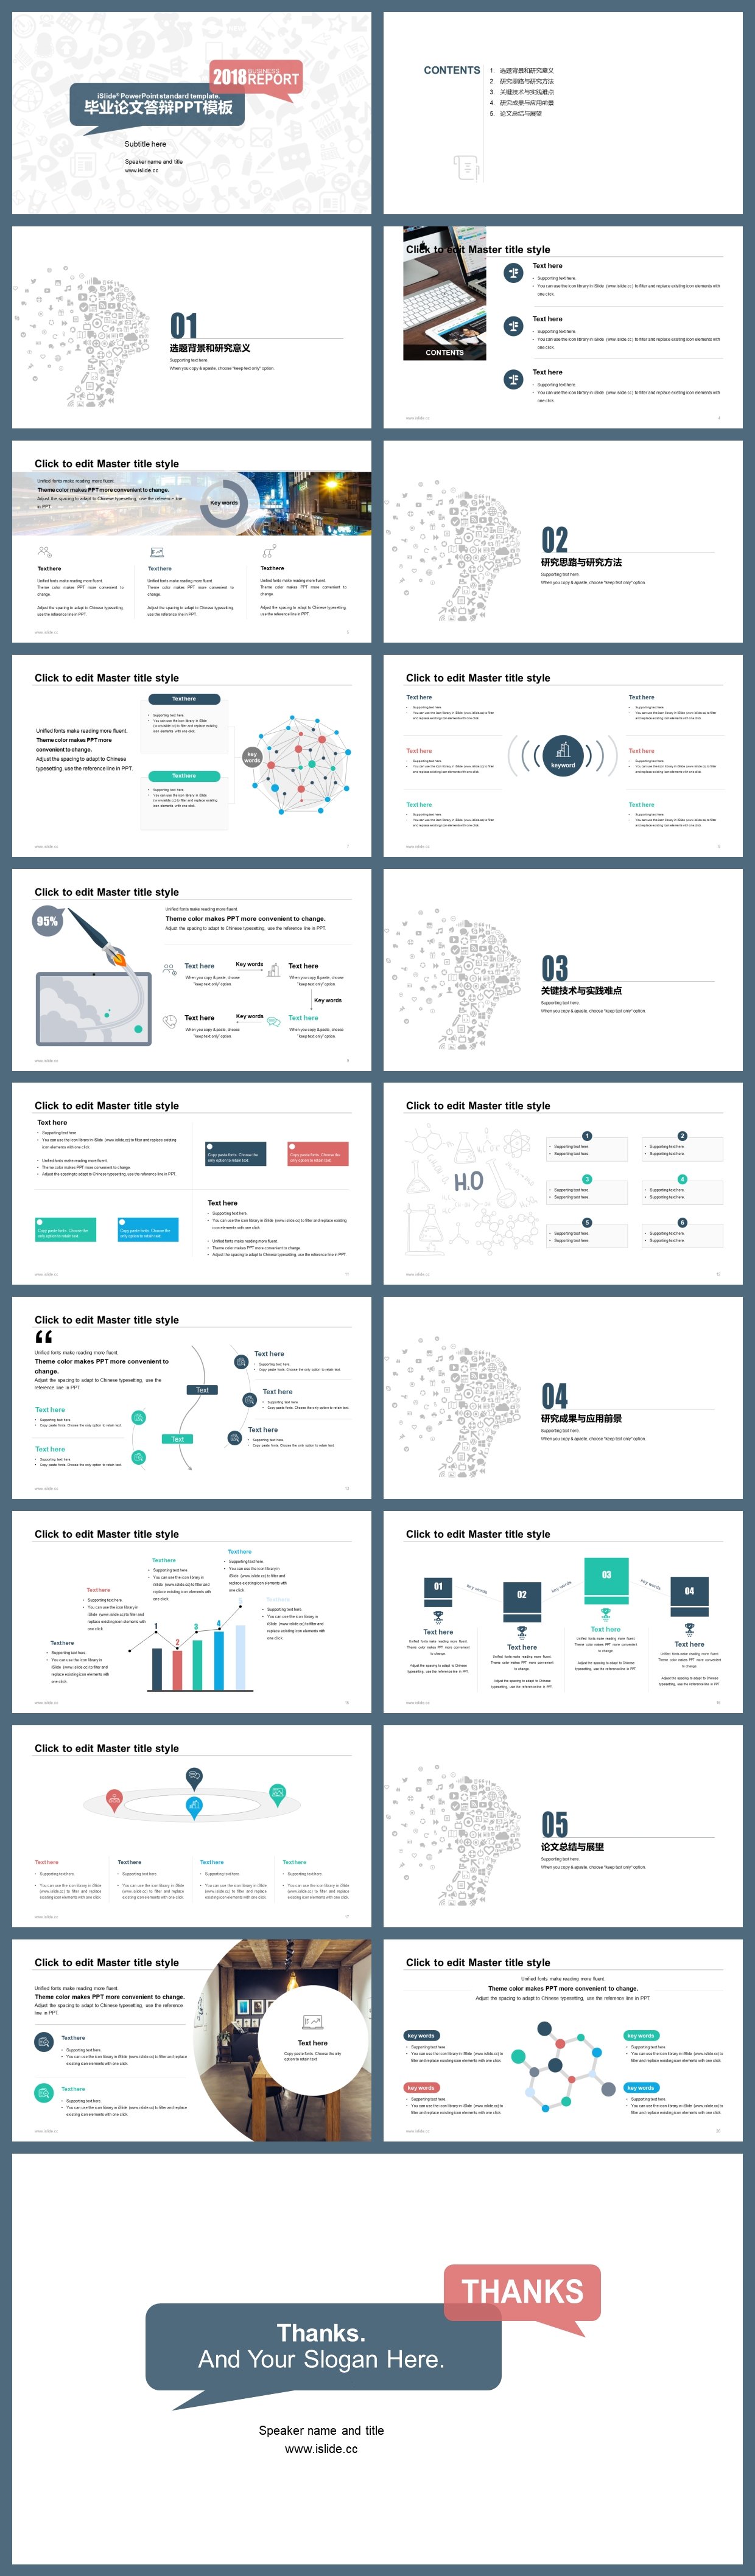 Master Thesis Defense PowerPoint Template Just Free Slide